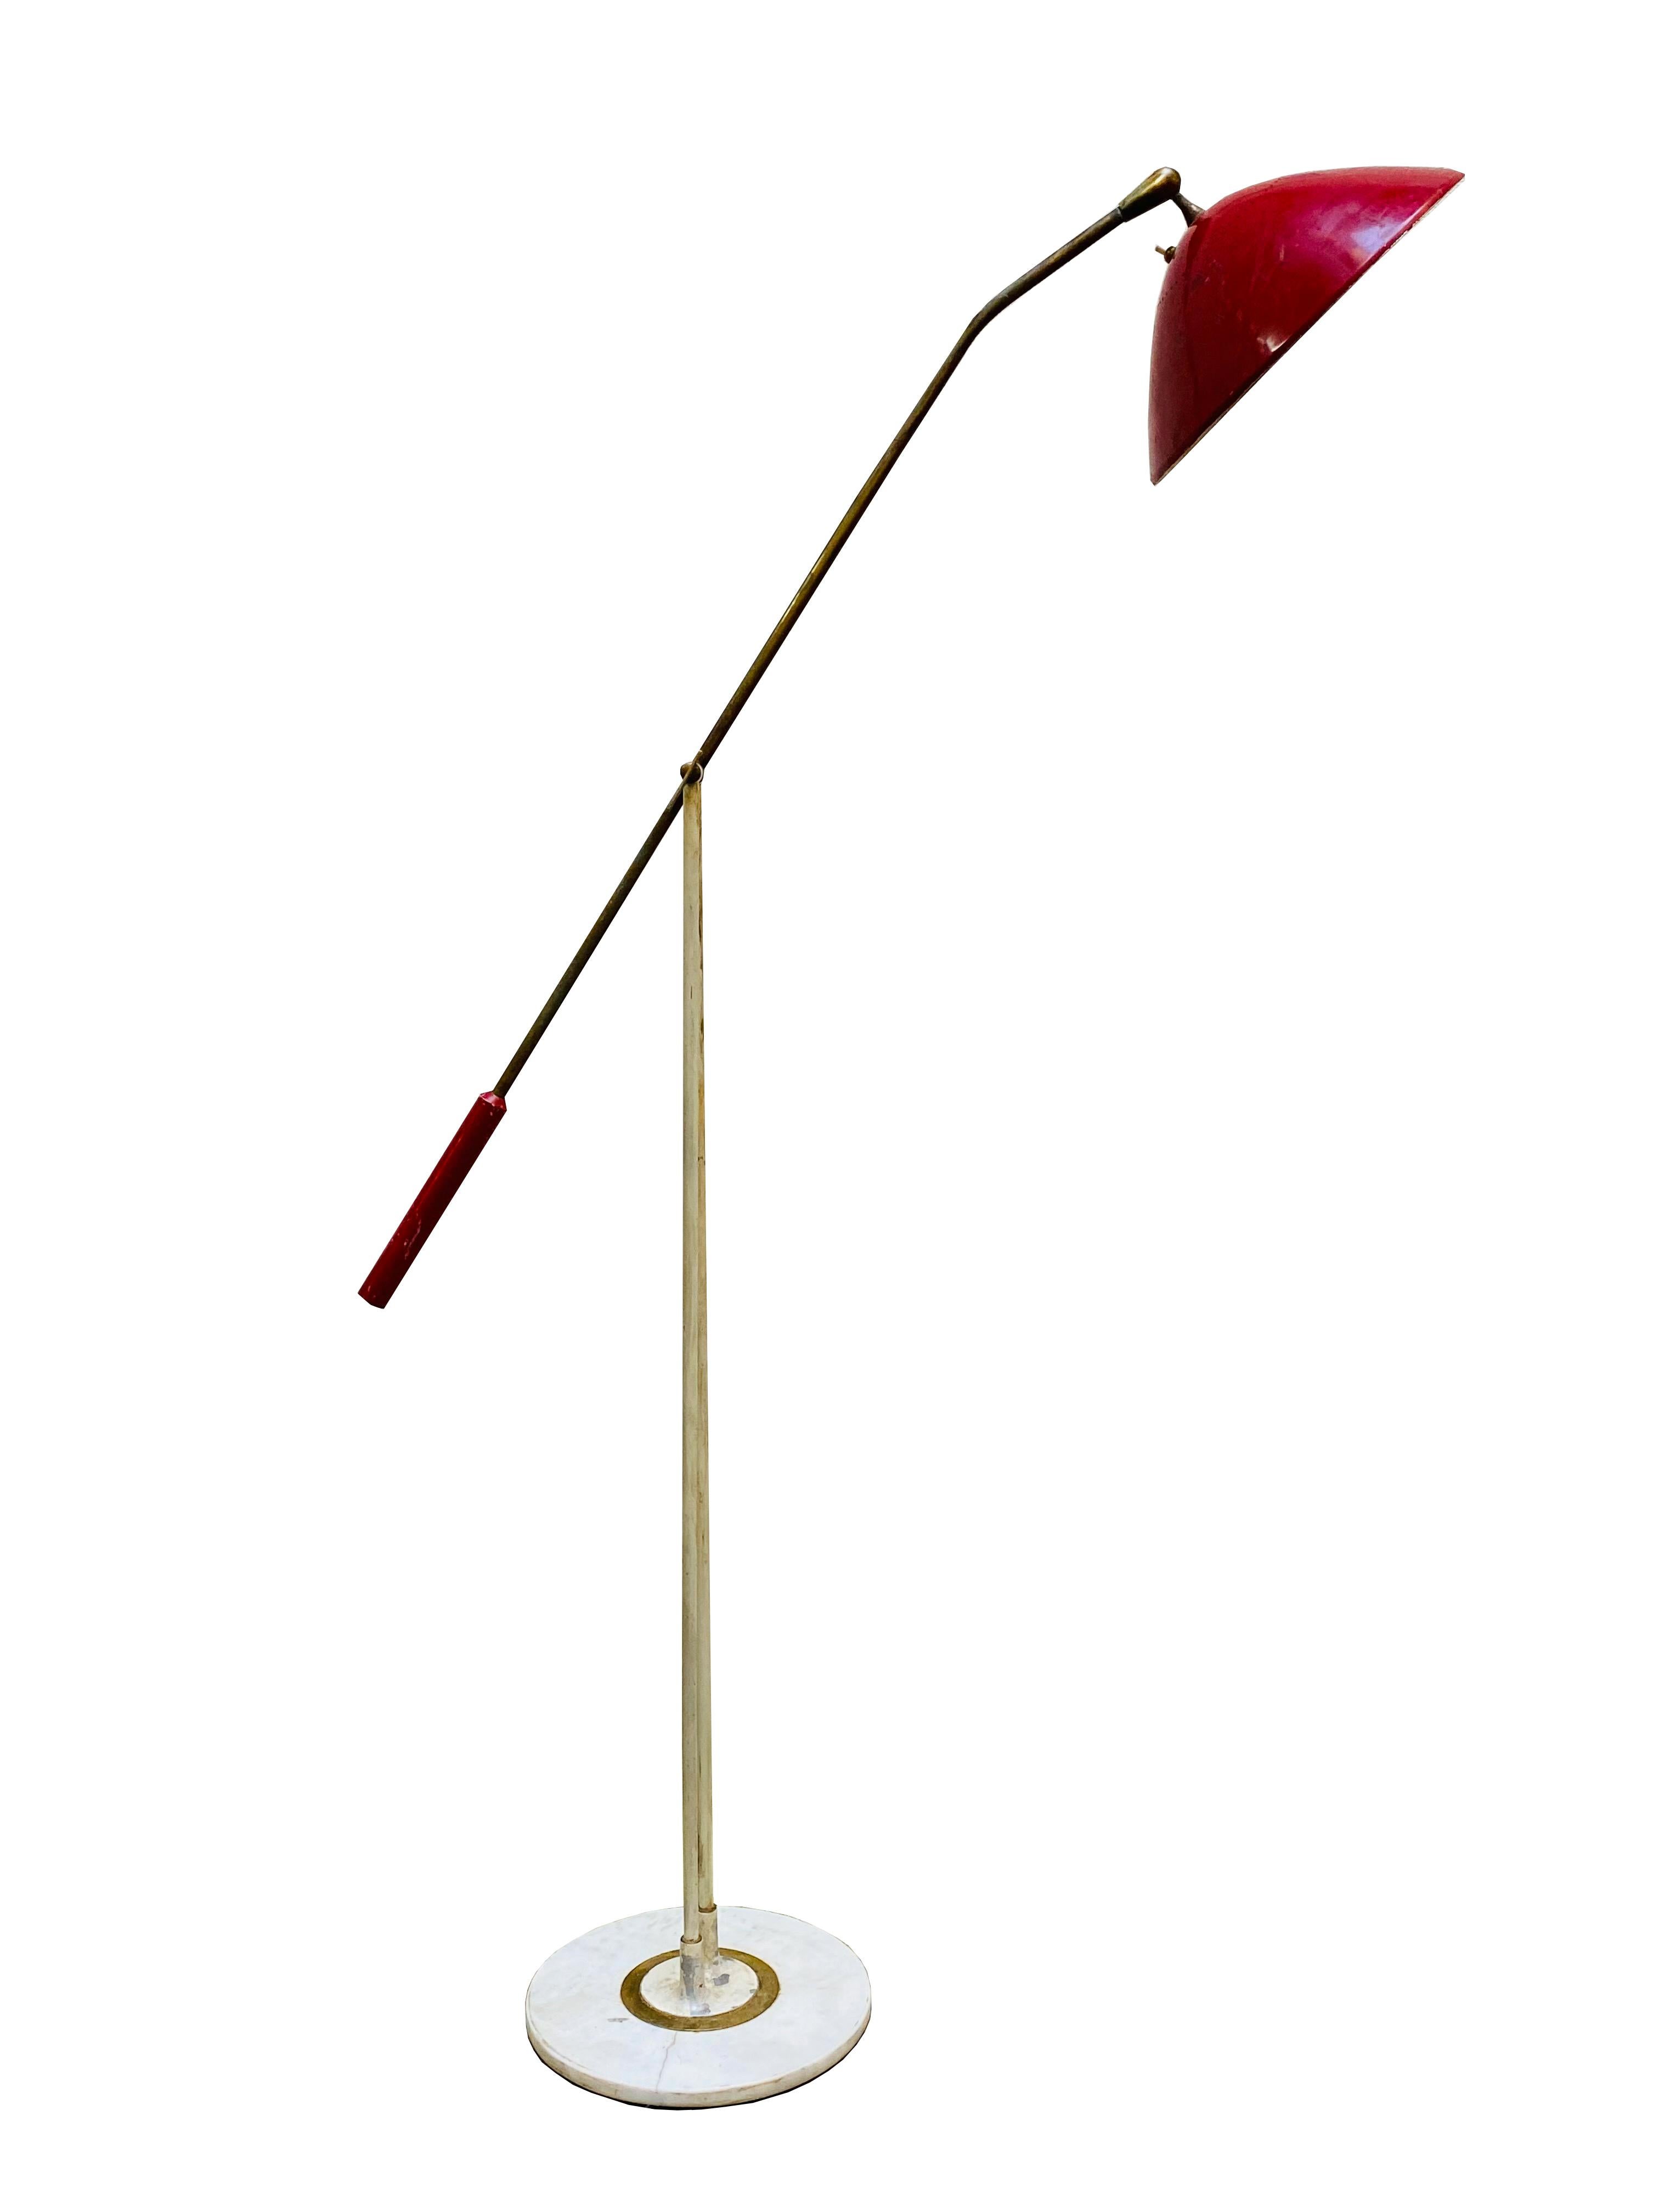 Floor lamp with brass swivel and directional arm, red lacquered metal shade and white marble base, Stilnovo 1950.